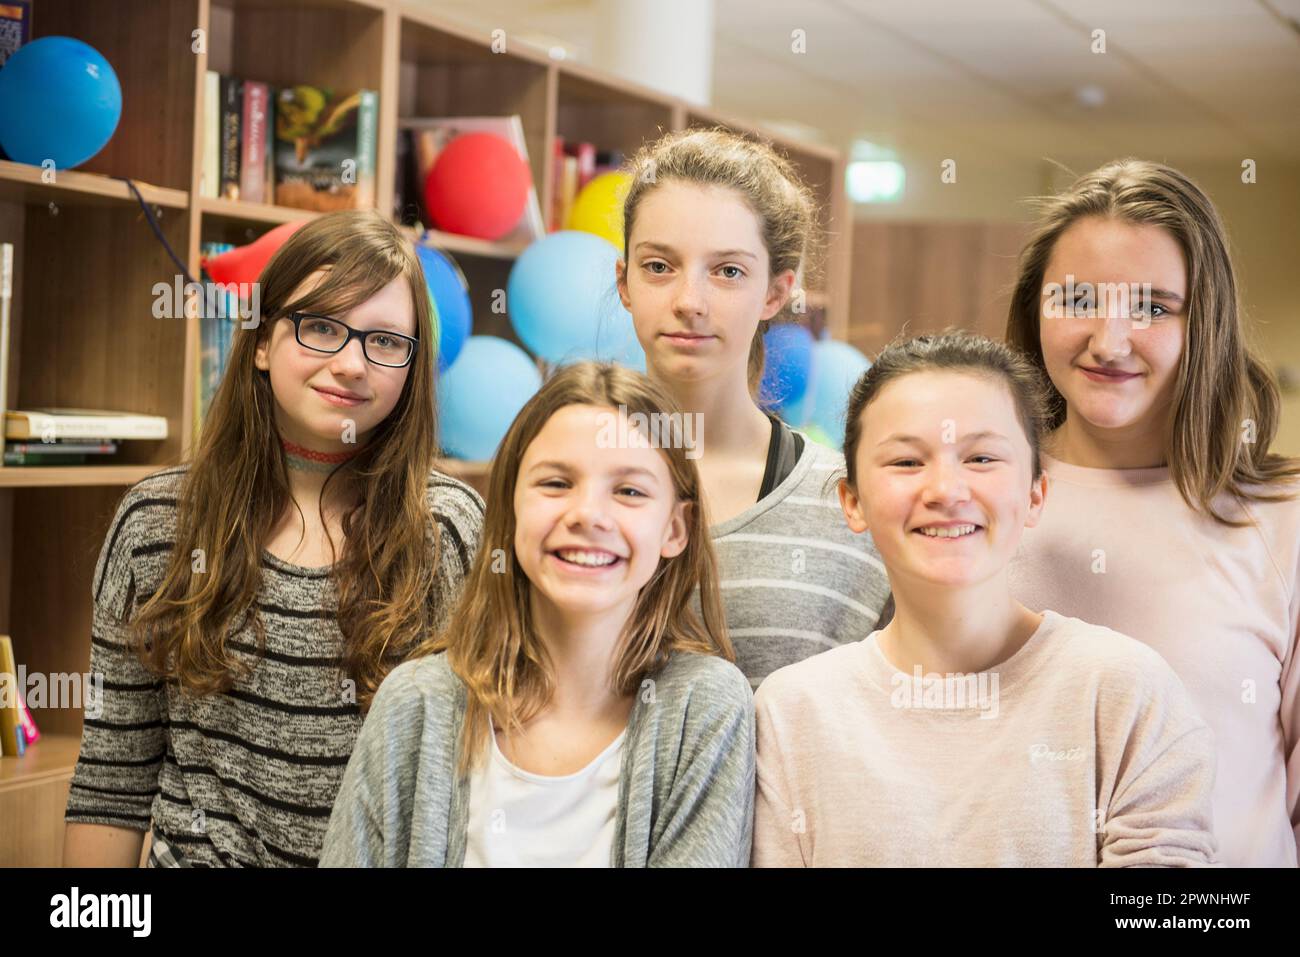 Portrait of five smiling girls Stock Photo